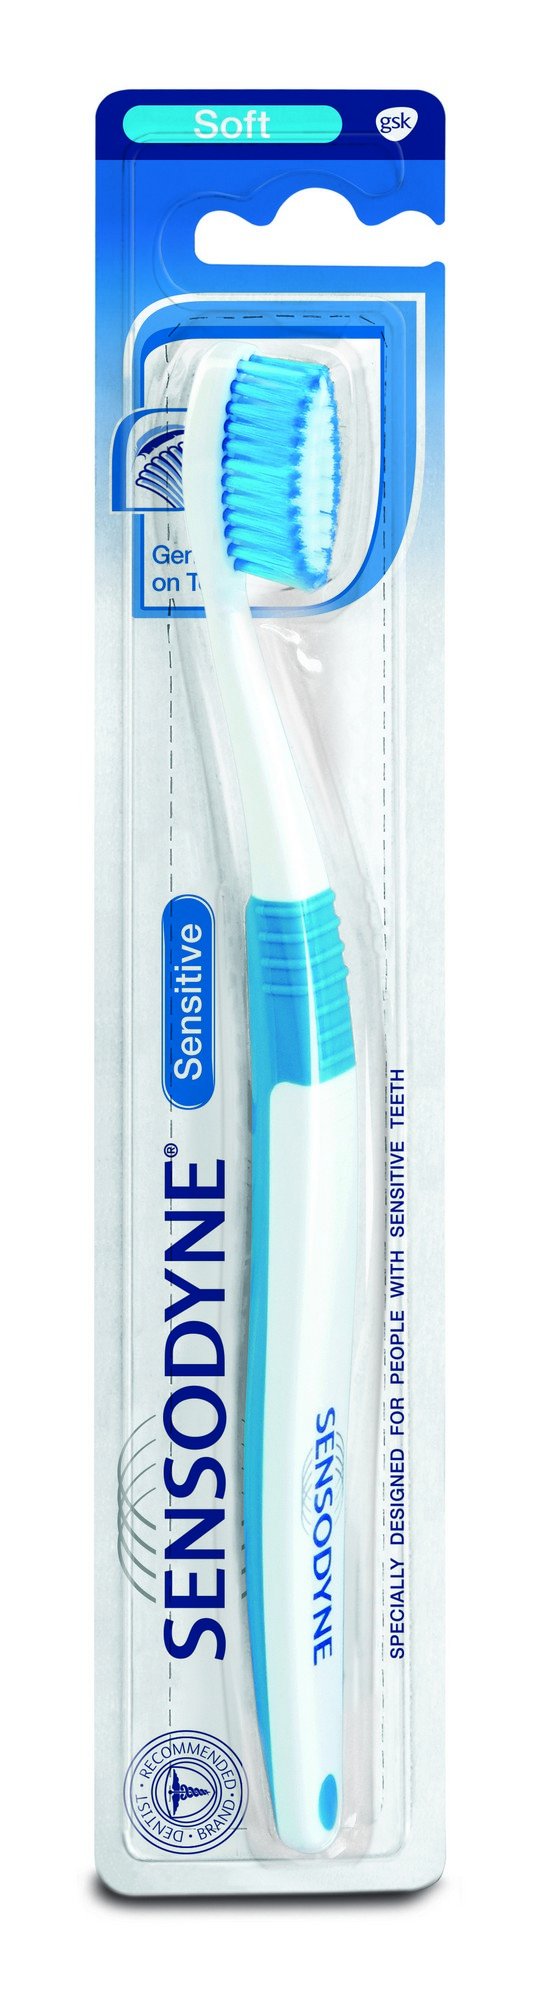 Sensodyne Sensitive Toothbrush (Color May Vary) -  Manual Toothbrushes in Sri Lanka from Arcade Online Shopping - Just Rs. 1047!